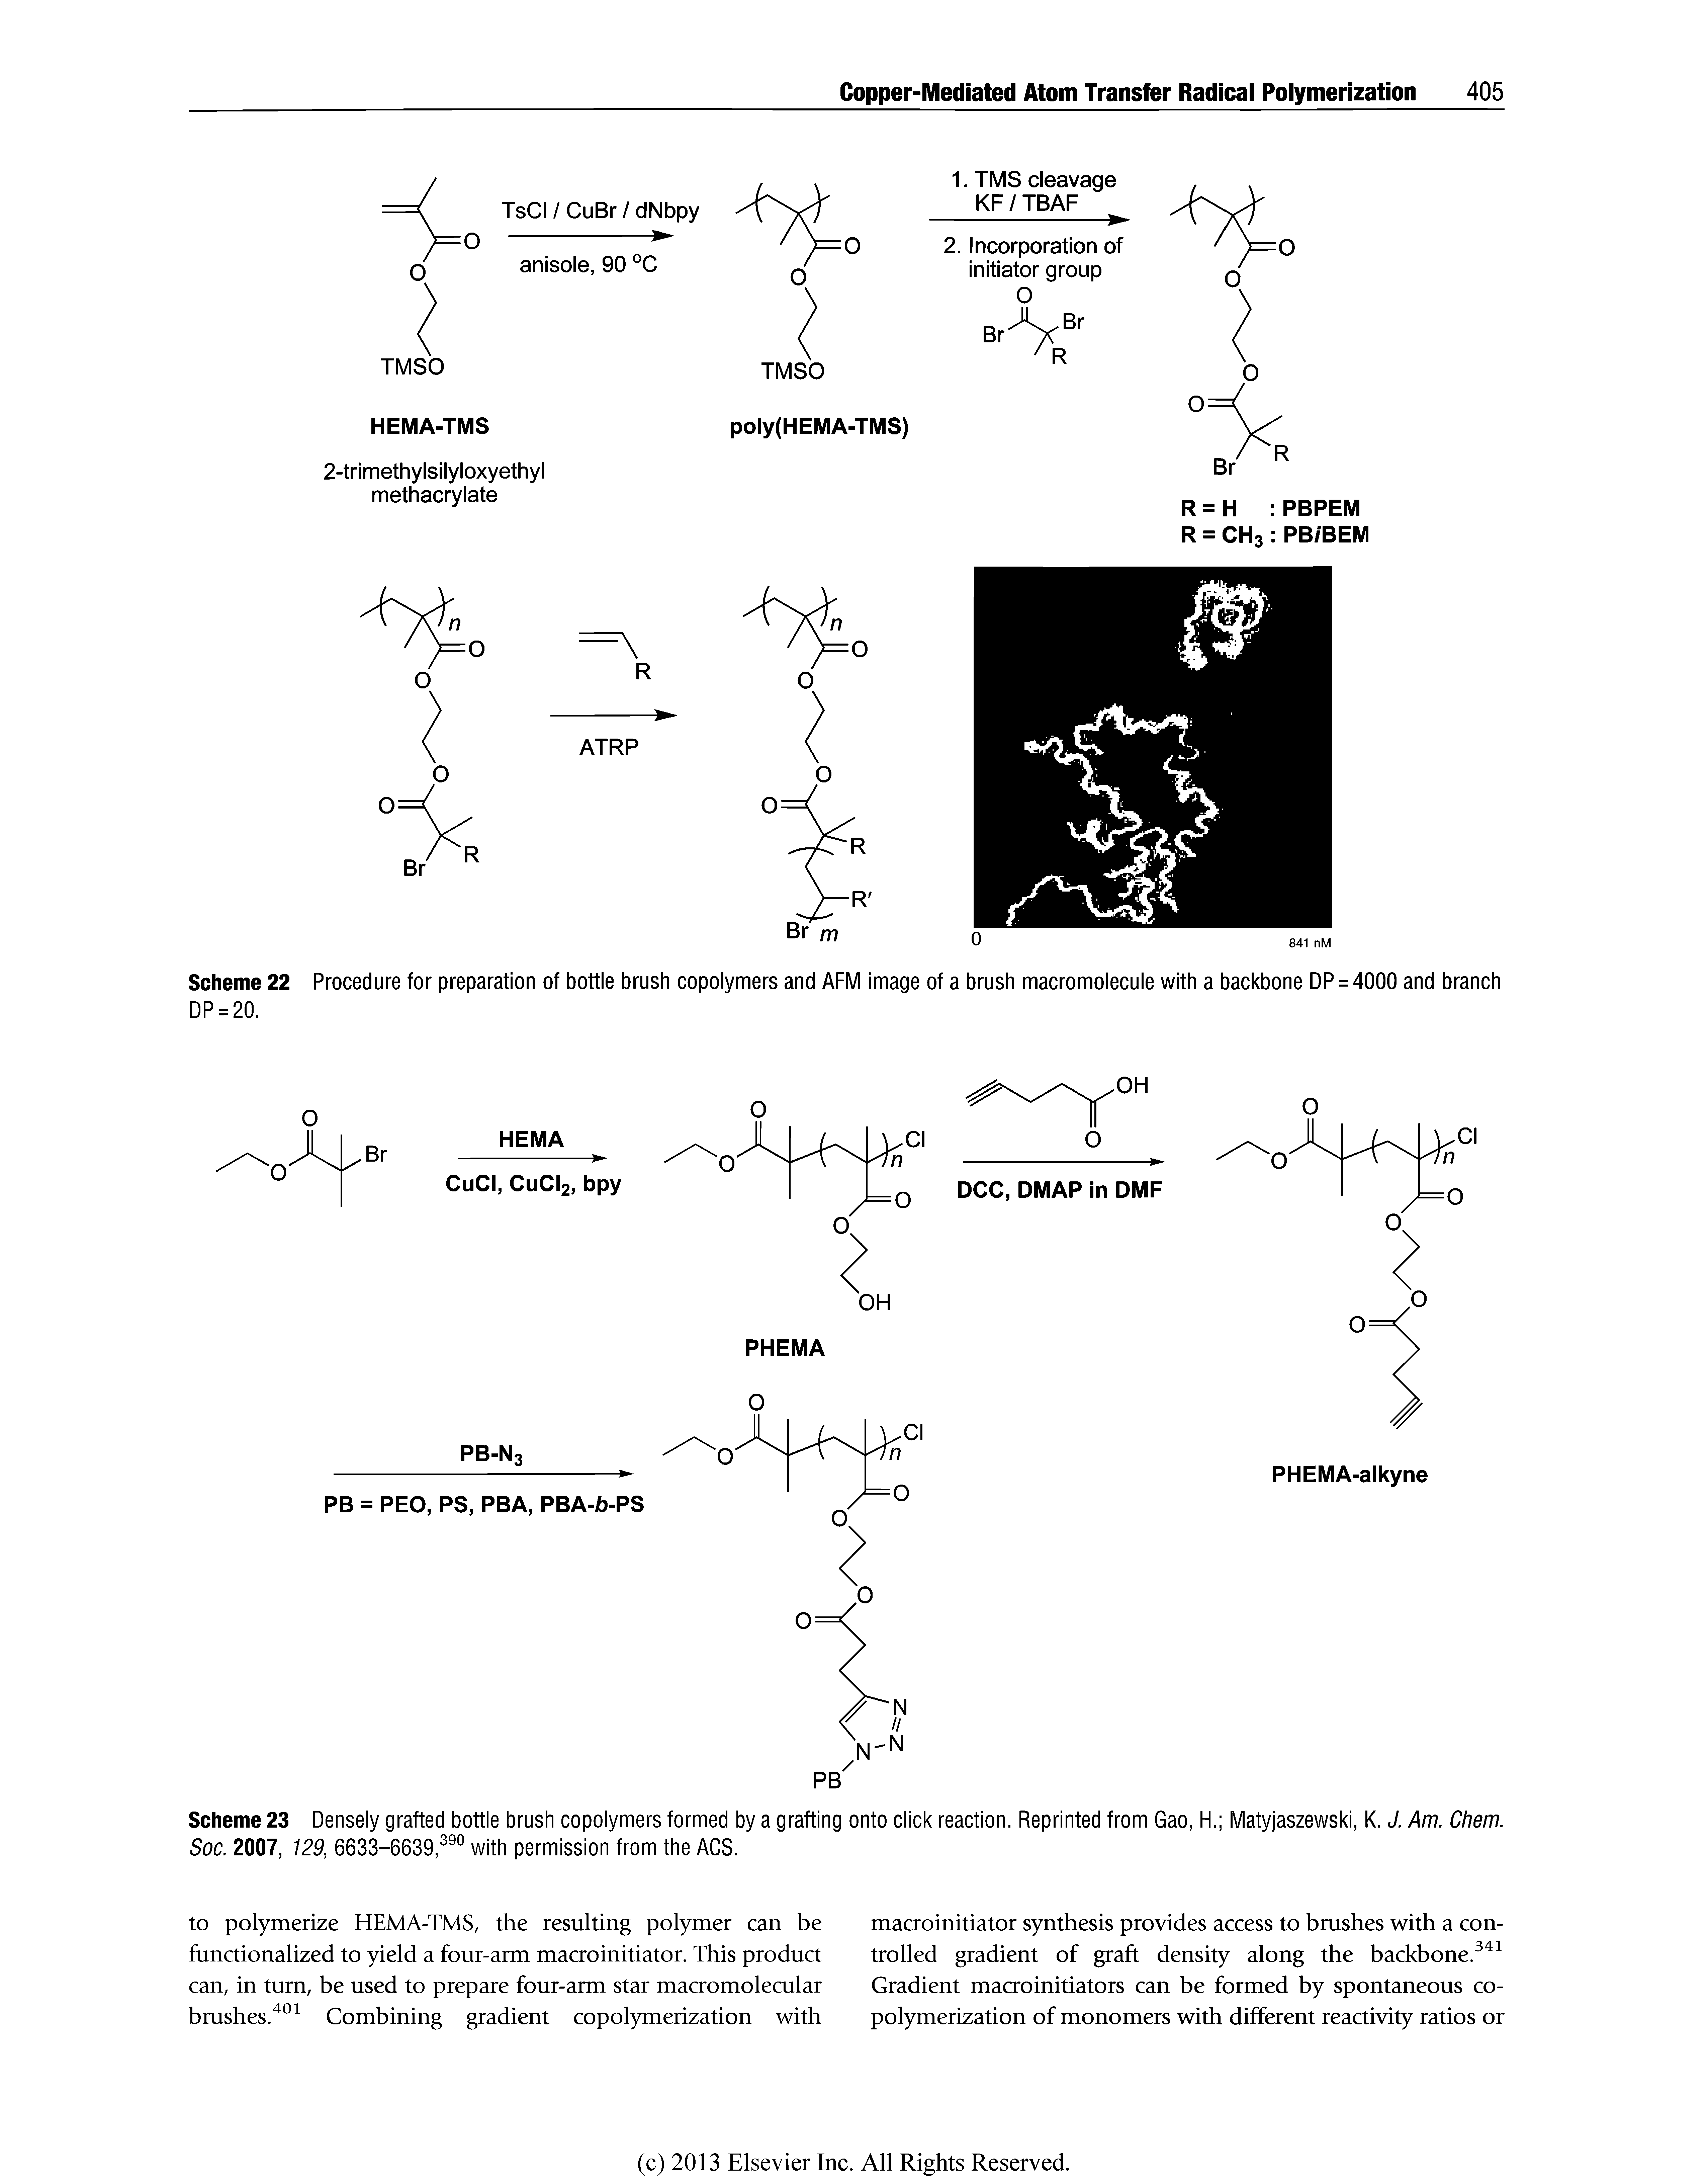 Scheme 23 Densely grafted bottle brush copolymers formed by a grafting onto click reaction. Reprinted from Gao, H. Matyjaszewski, K. J. Am. Chem. Soc. 2007, 129, 6633-6639, ° with permission from the ACS.